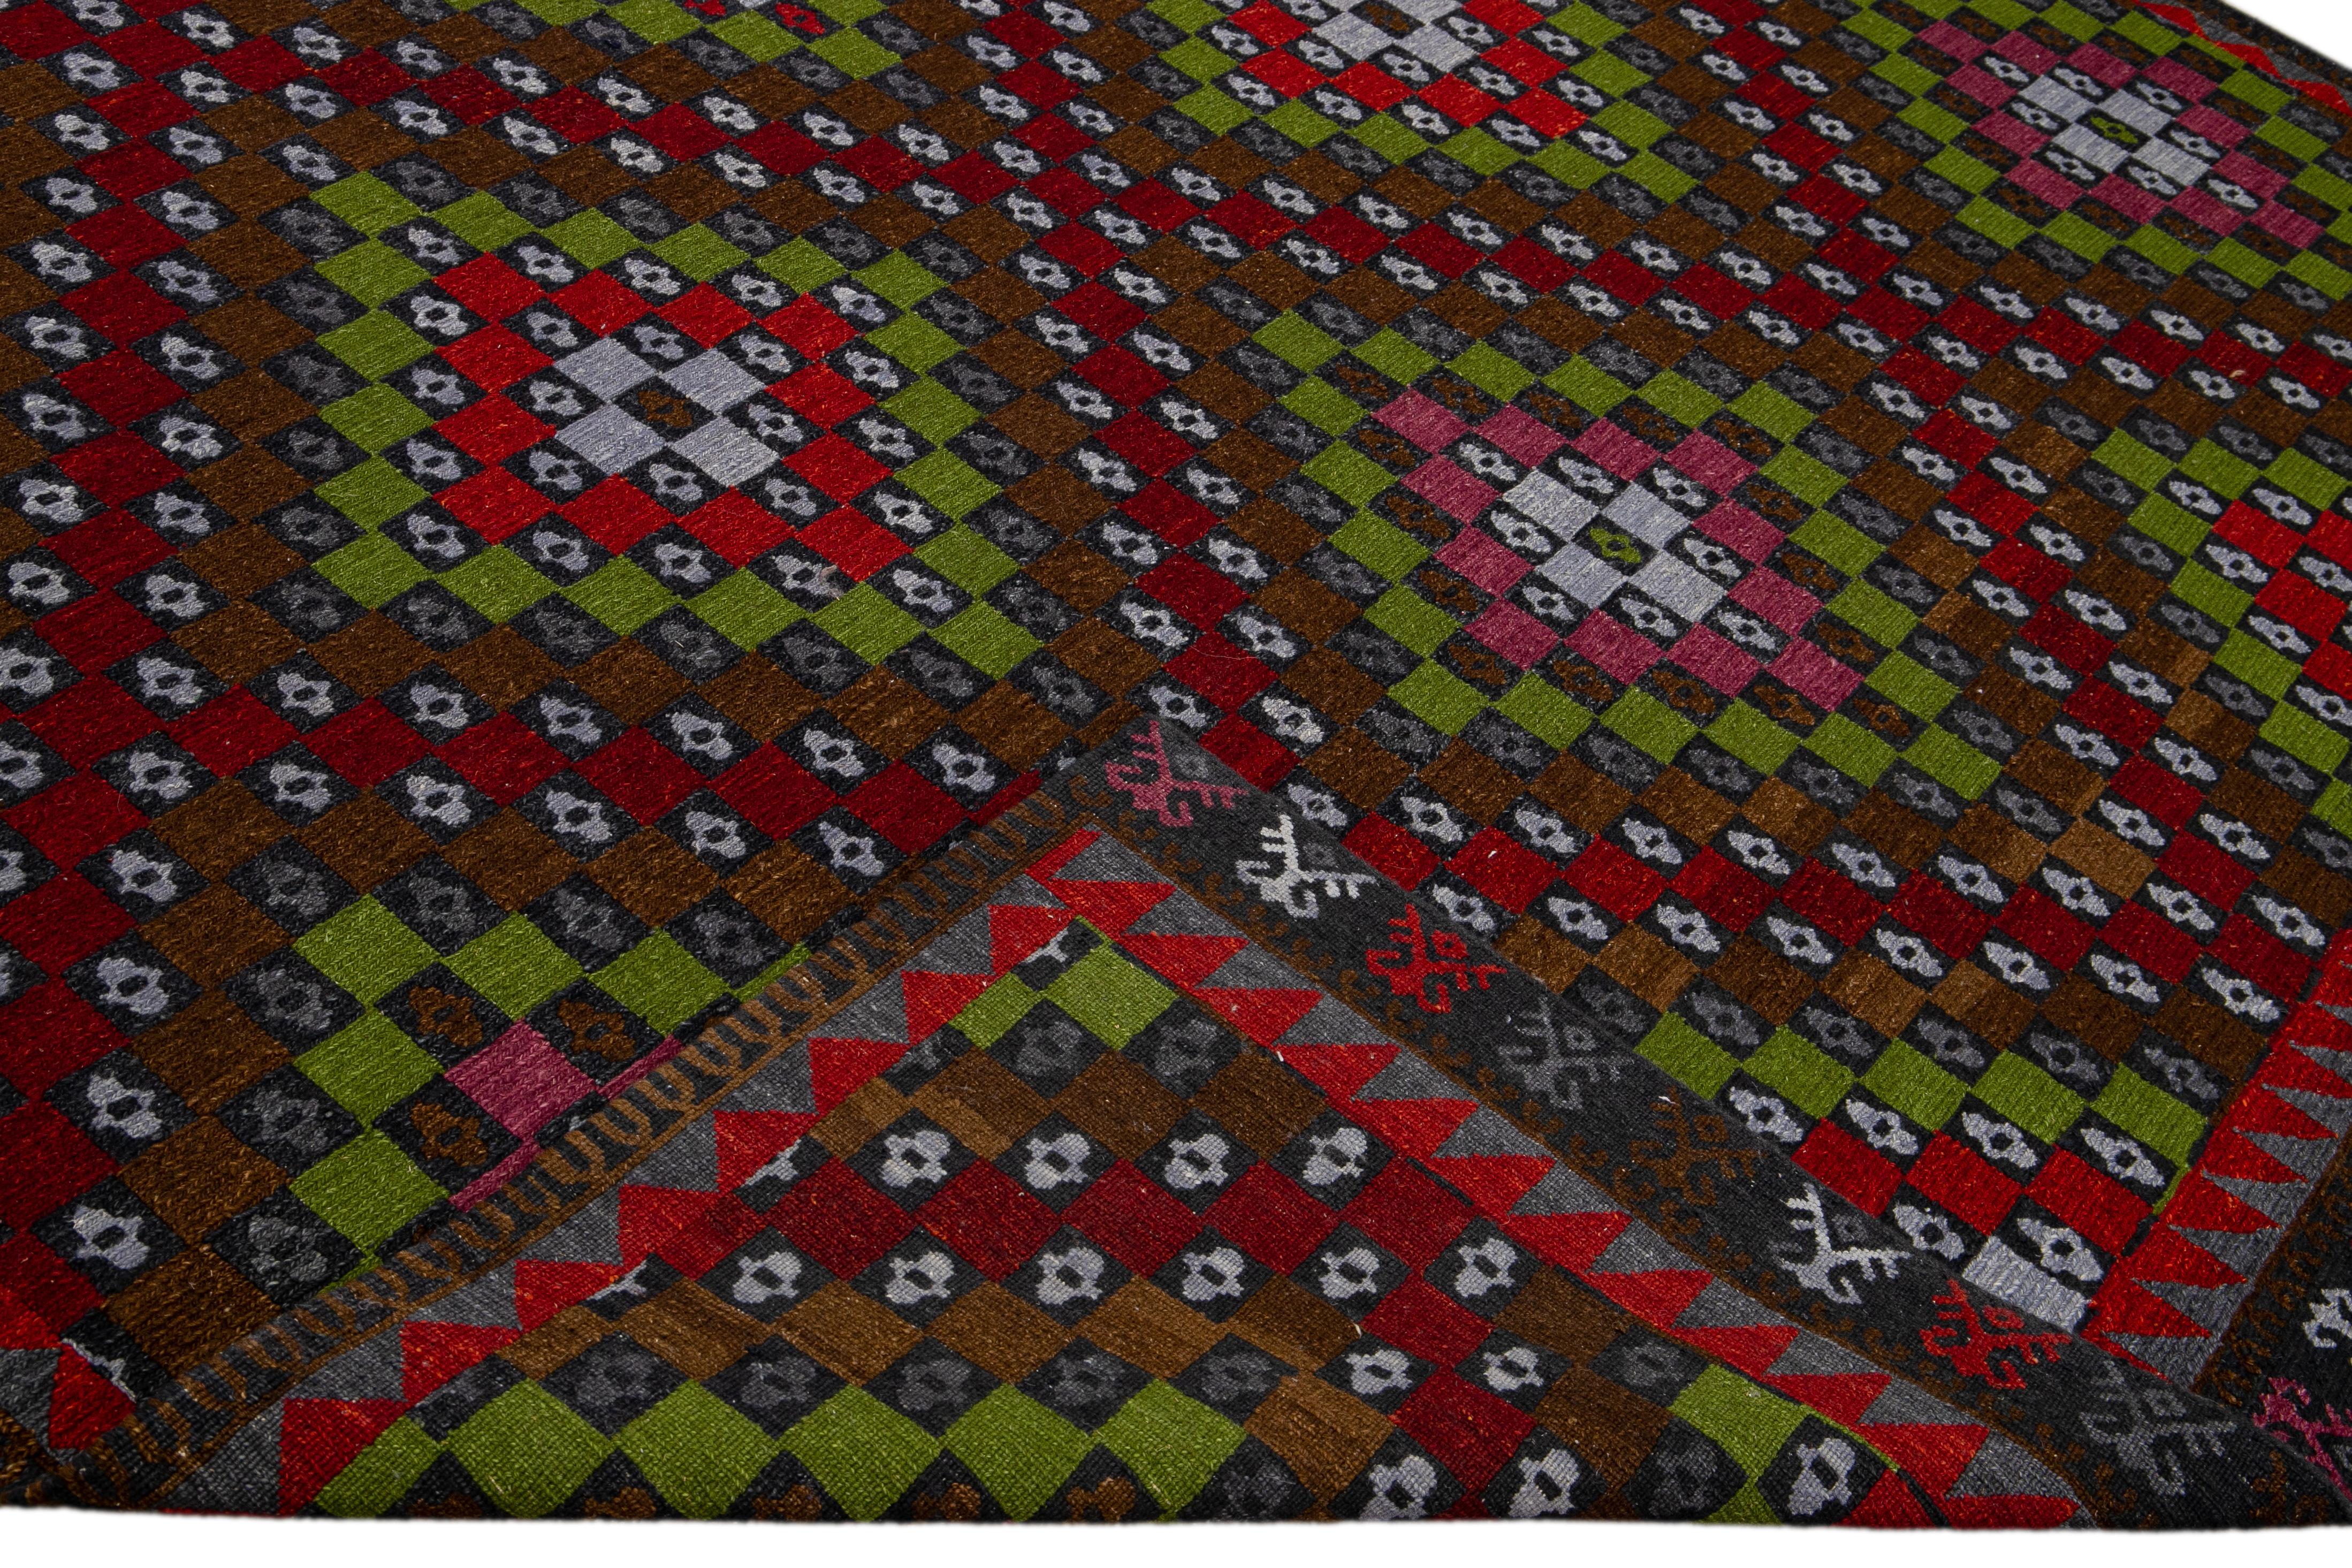 Beautiful Modern Soumak hand-knotted wool rug with a brown field. This piece has red, green, pink, and white accents in a gorgeous all-over geometric design.

This rug measures: 10' x 14'.

Our rugs are professional cleaning before shipping.